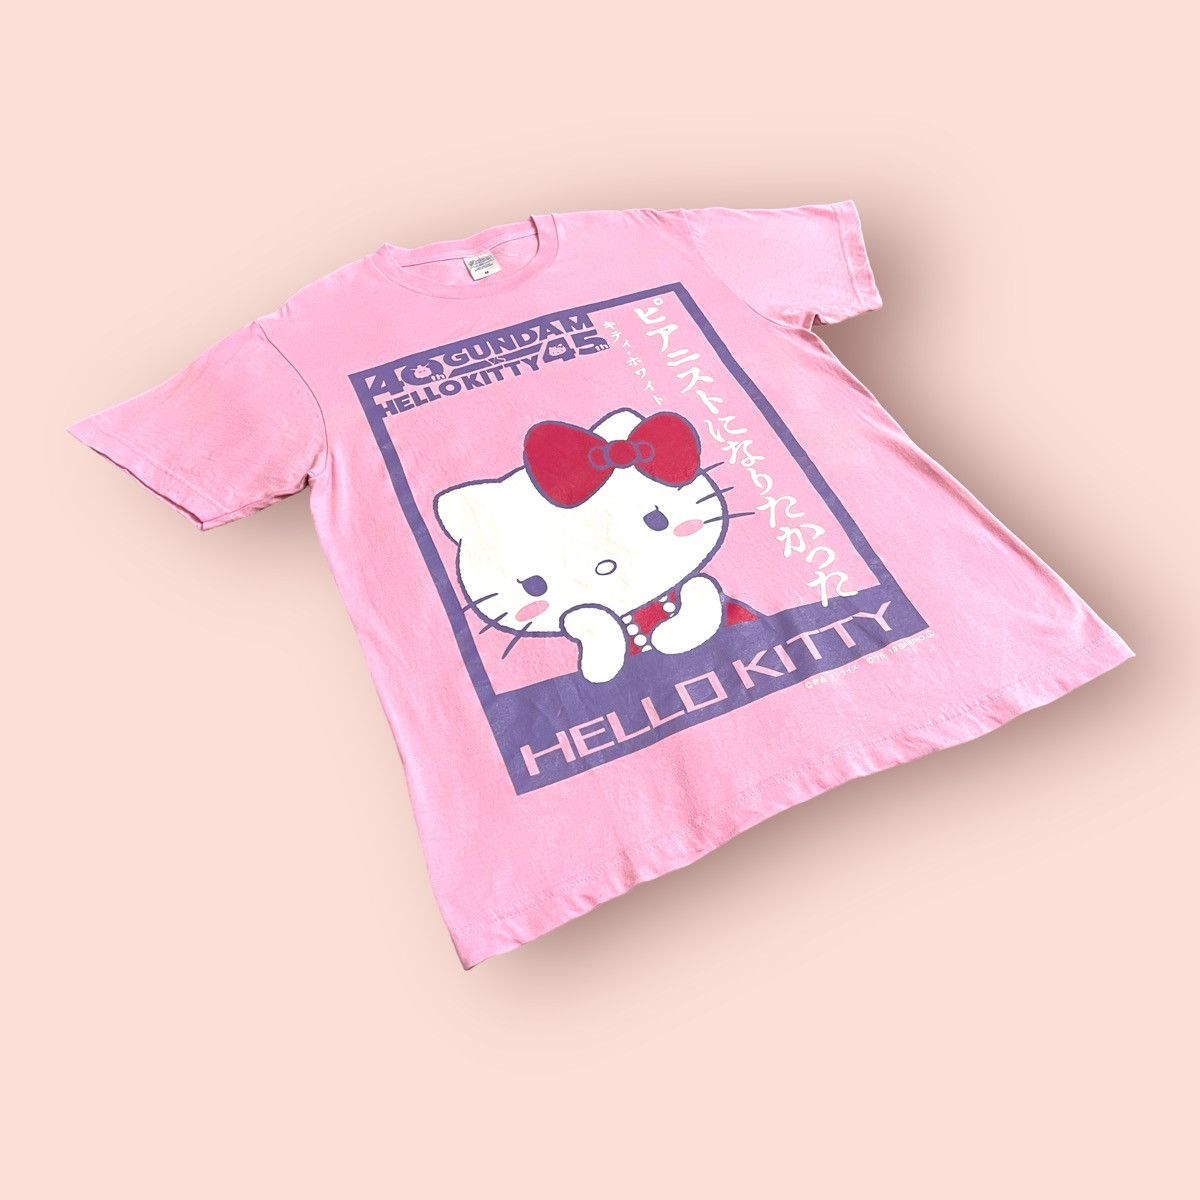 Japanese Brand LIMITED EDITION 2019 GUNDAM X HELLO KITTY PINK TEE IN PINK Size US M / EU 48-50 / 2 - 4 Thumbnail